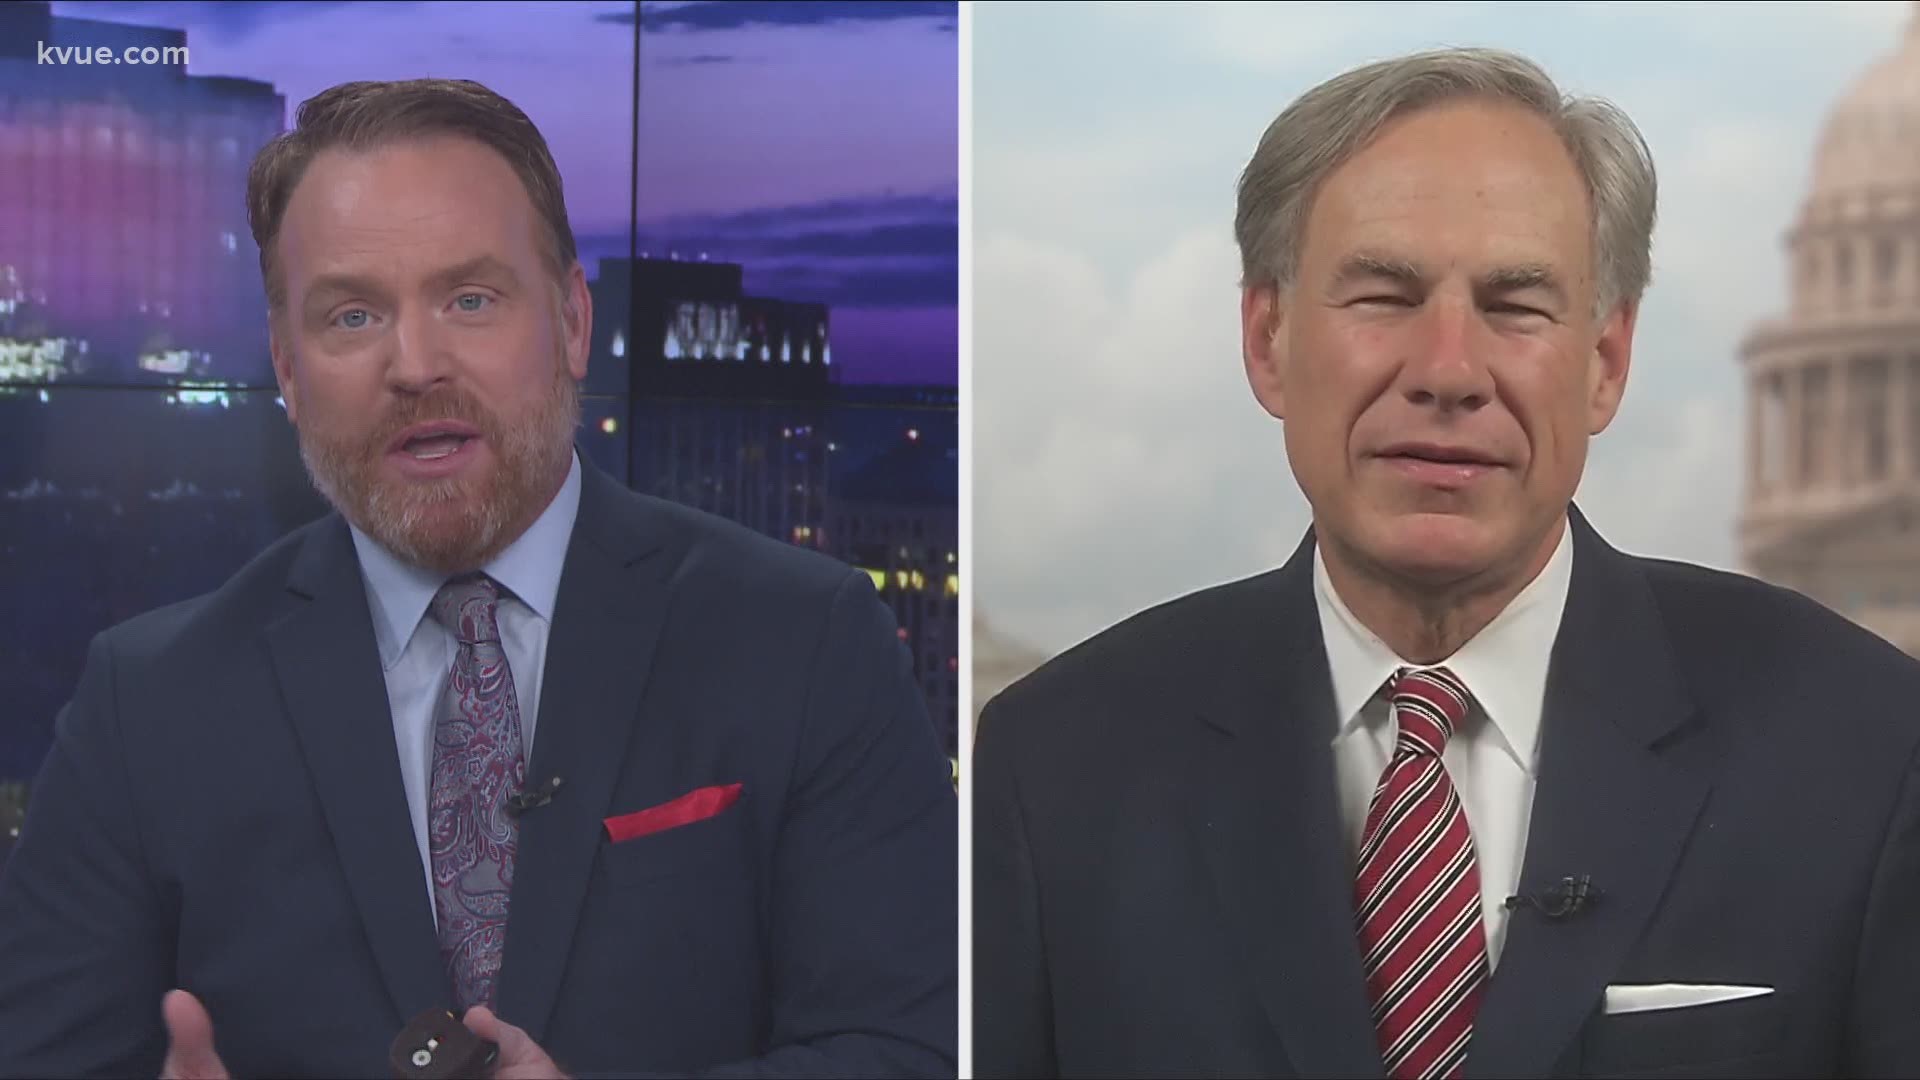 Gov. Greg Abbott joined KVUE's Bryan Mays to discuss a number of coronavirus-related issues heavy on Central Texans' minds.